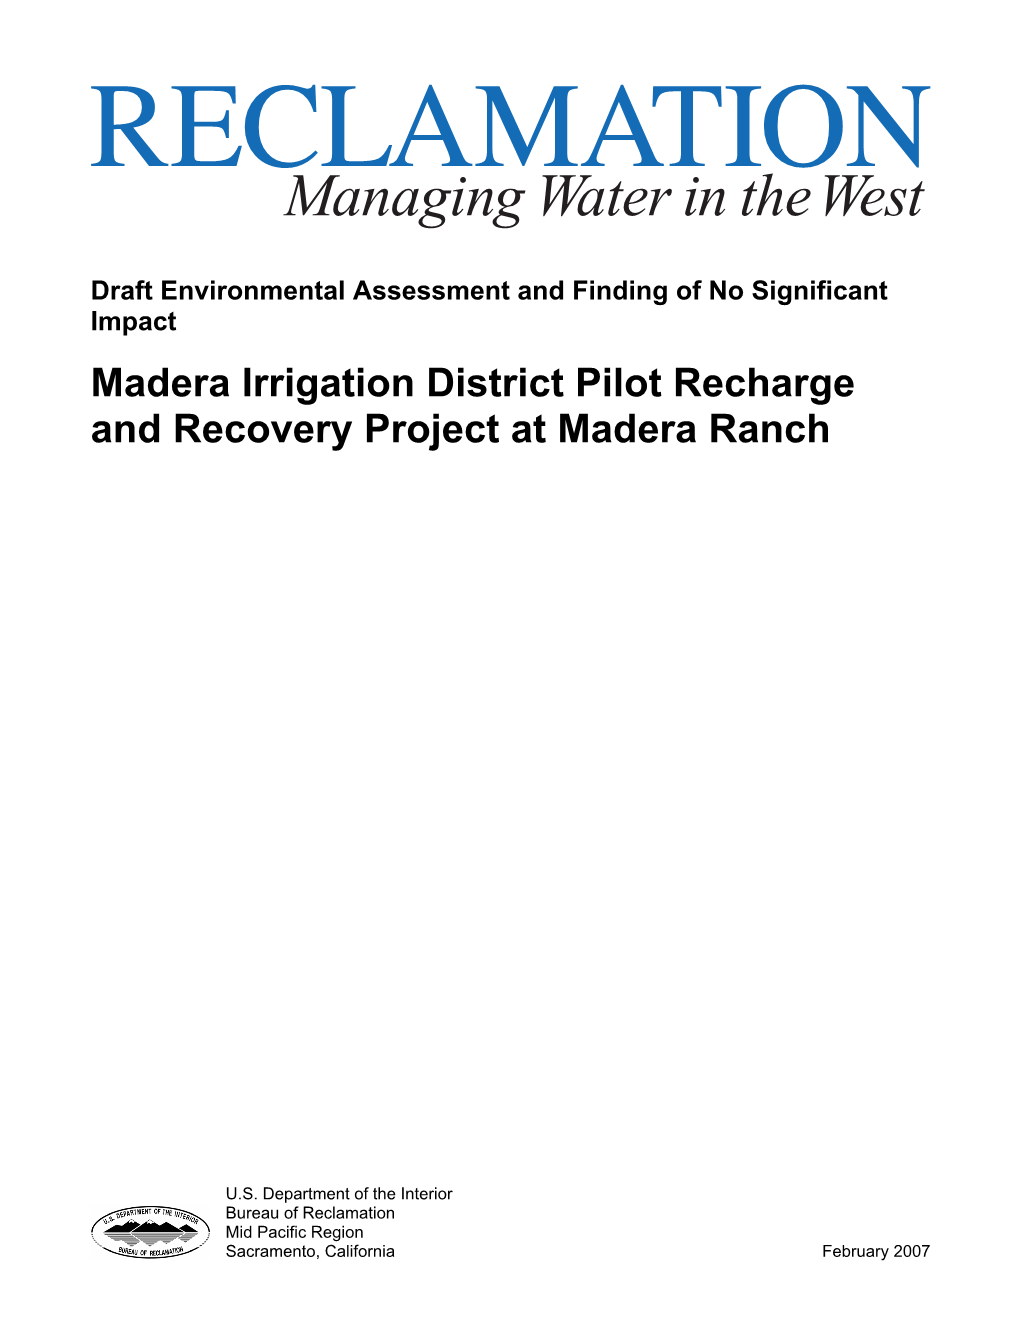 Madera Irrigation District Pilot Recharge and Recovery Project at Madera Ranch